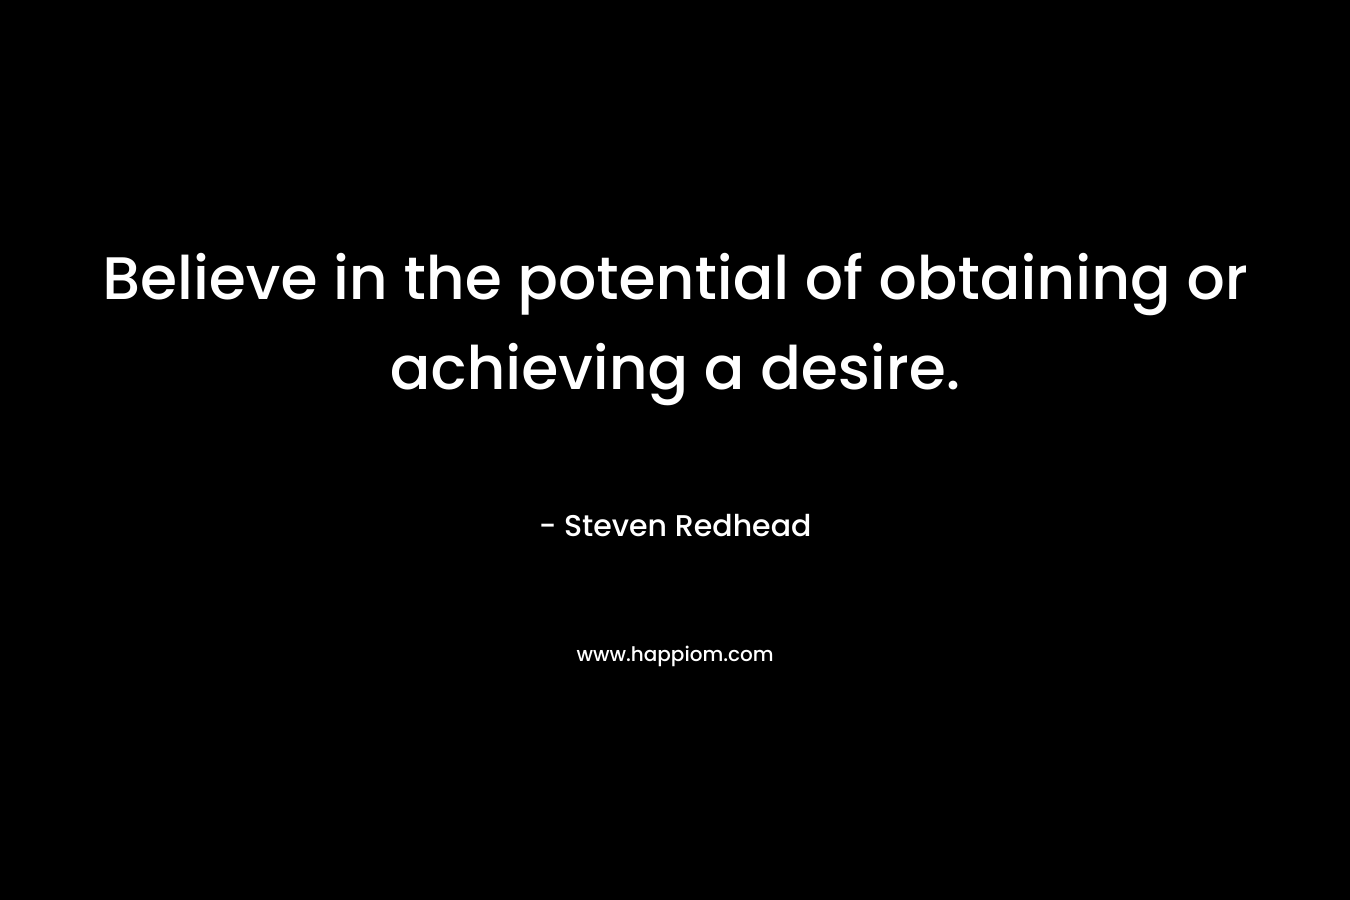 Believe in the potential of obtaining or achieving a desire.